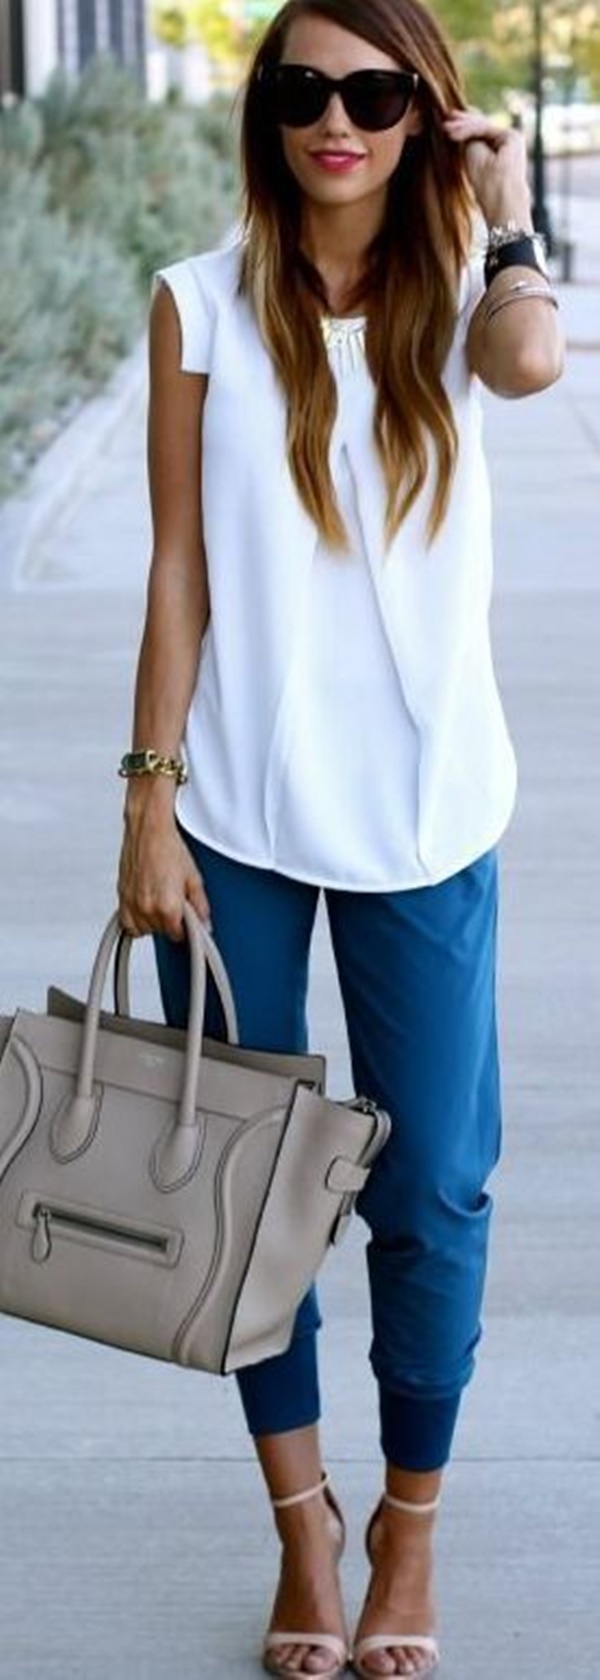 white sleeveless top outfit